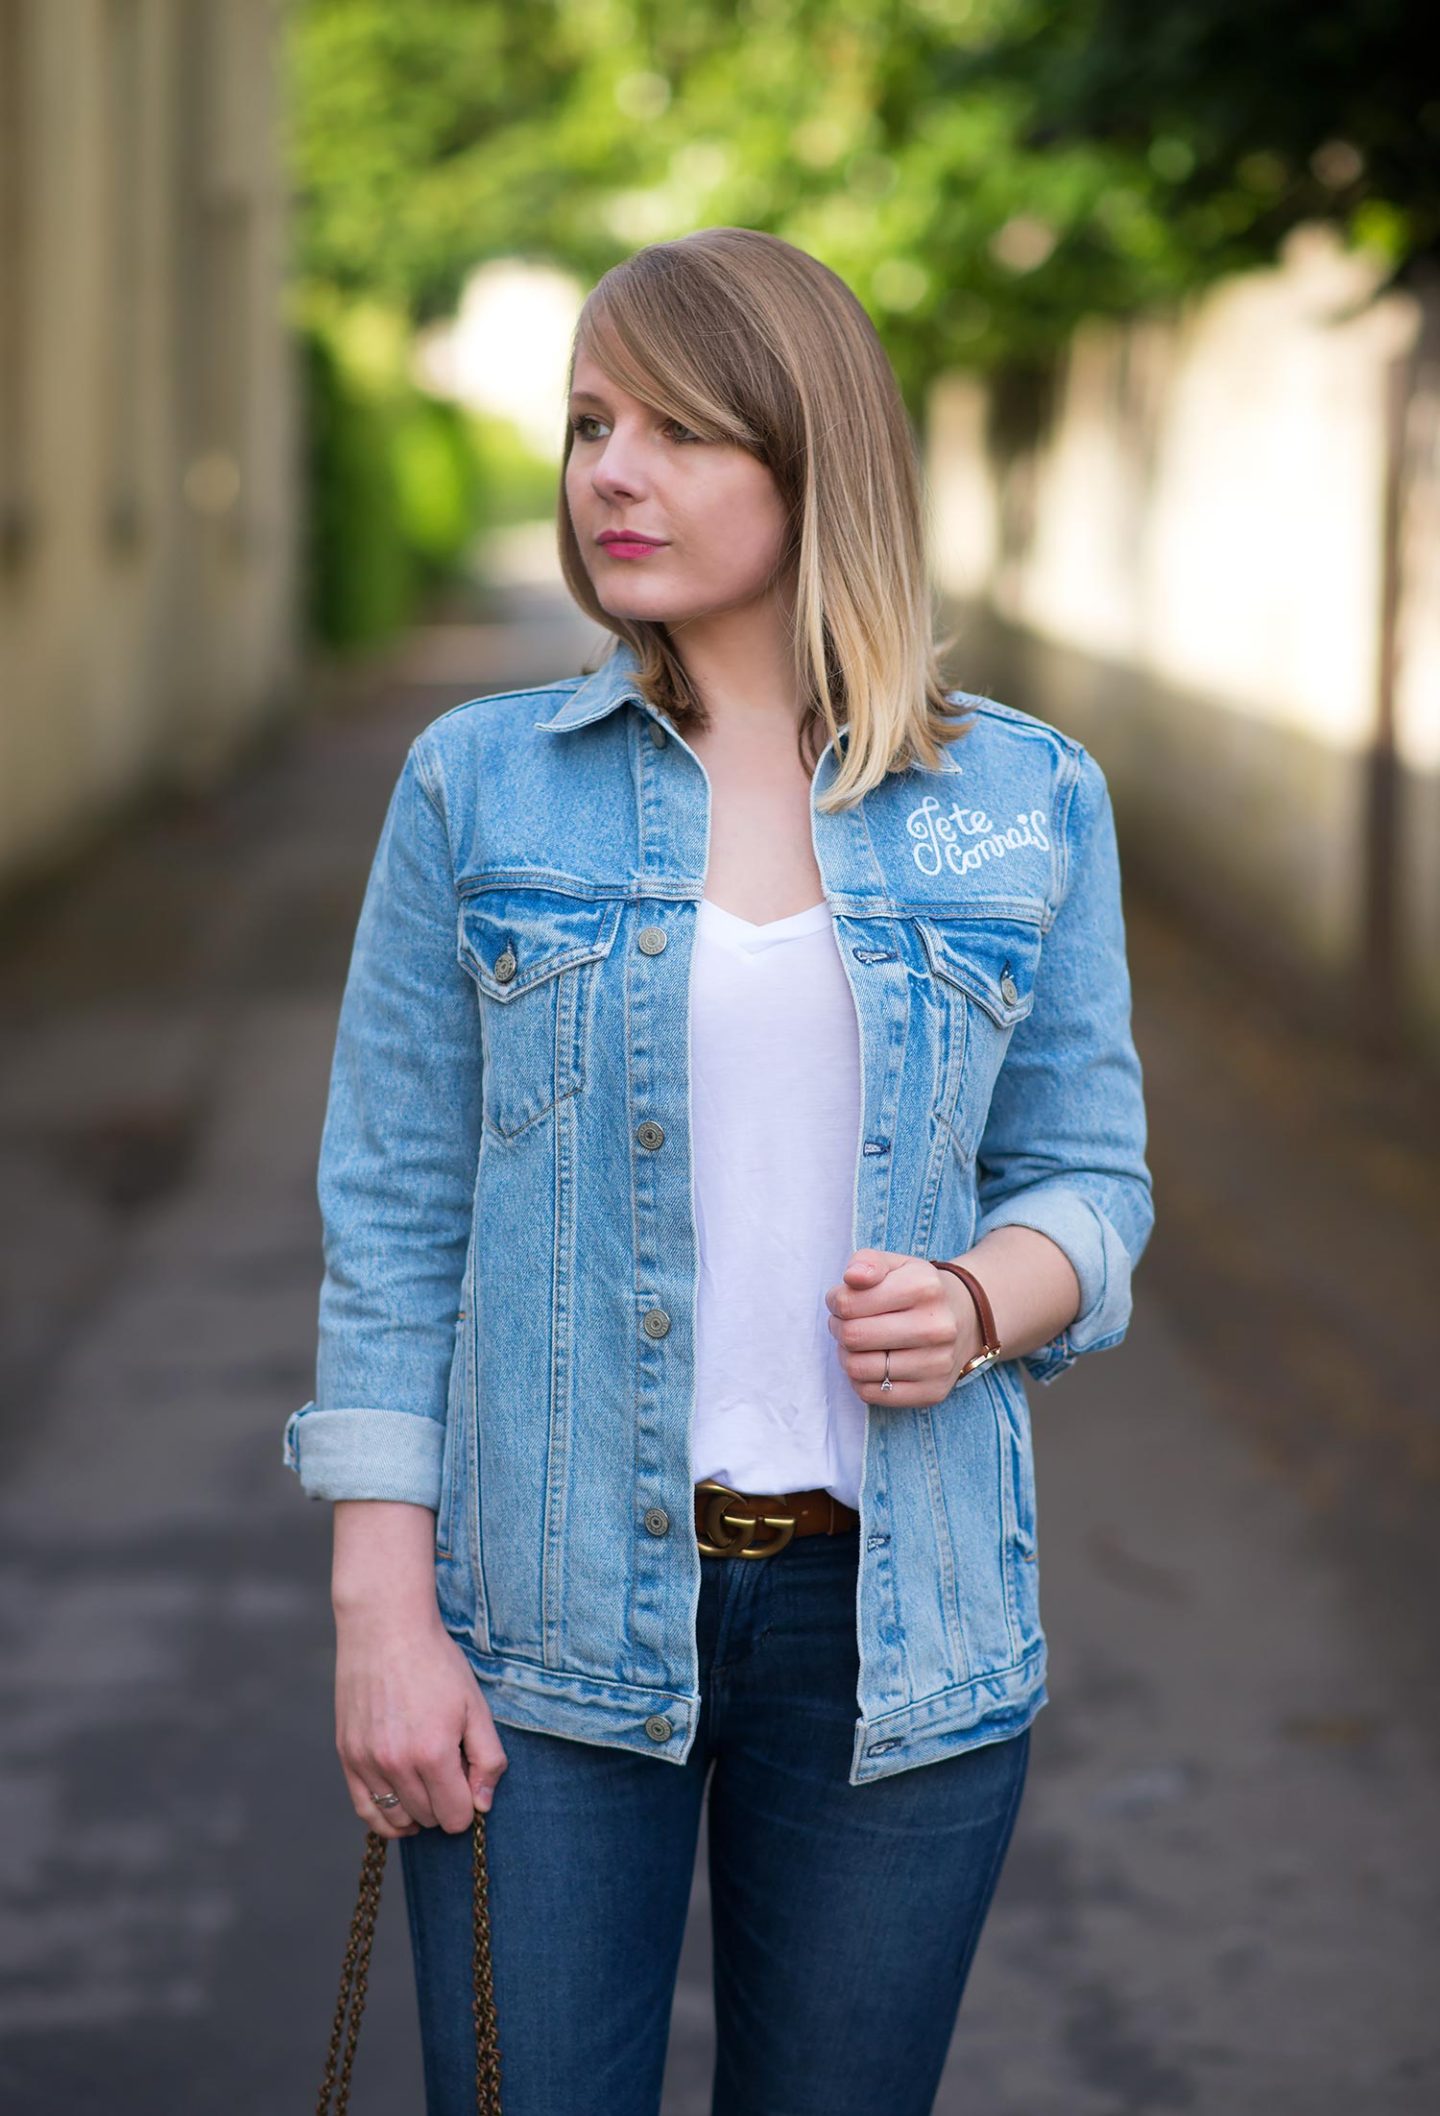 An In Depth Interview With Denim Addict, Lorna Burford On Her Jeans Collection